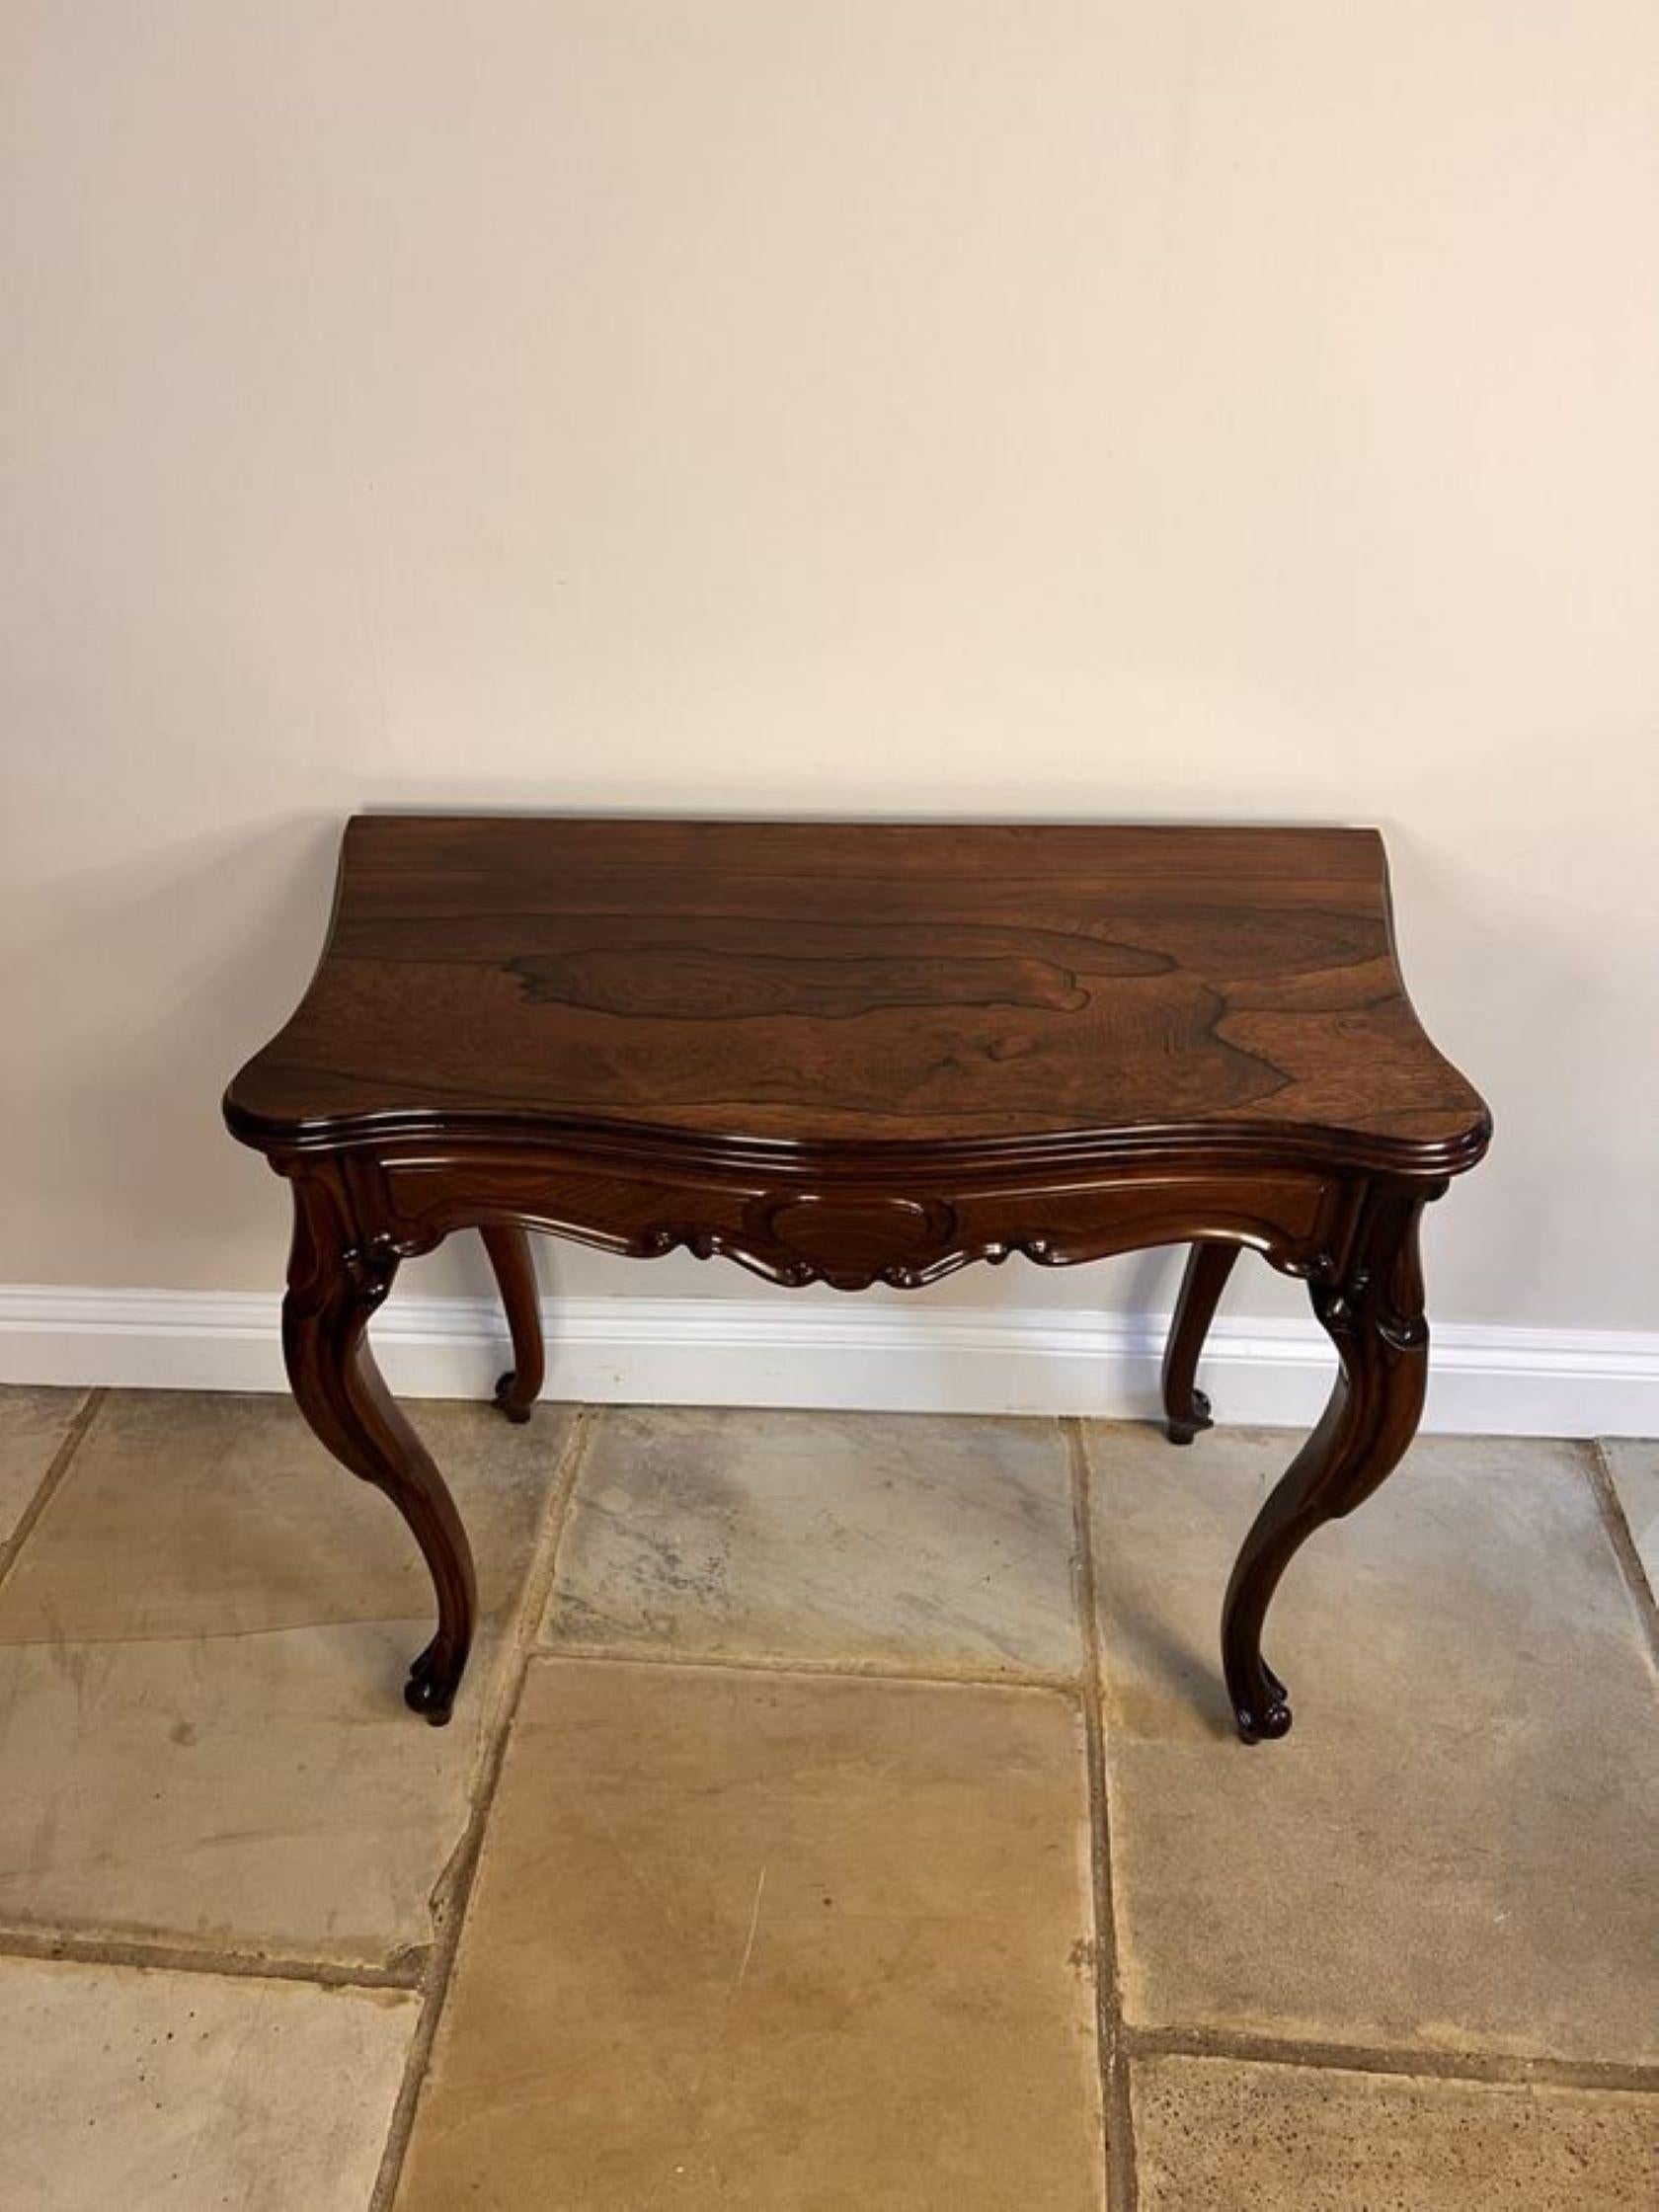 Wonderful antique Victorian quality rosewood tea table, having a quality rosewood serpentine shaped top with a moulded edge opening to reveal a superb polished interior, carved rosewood frieze standing on shaped carved cabriole legs with scroll